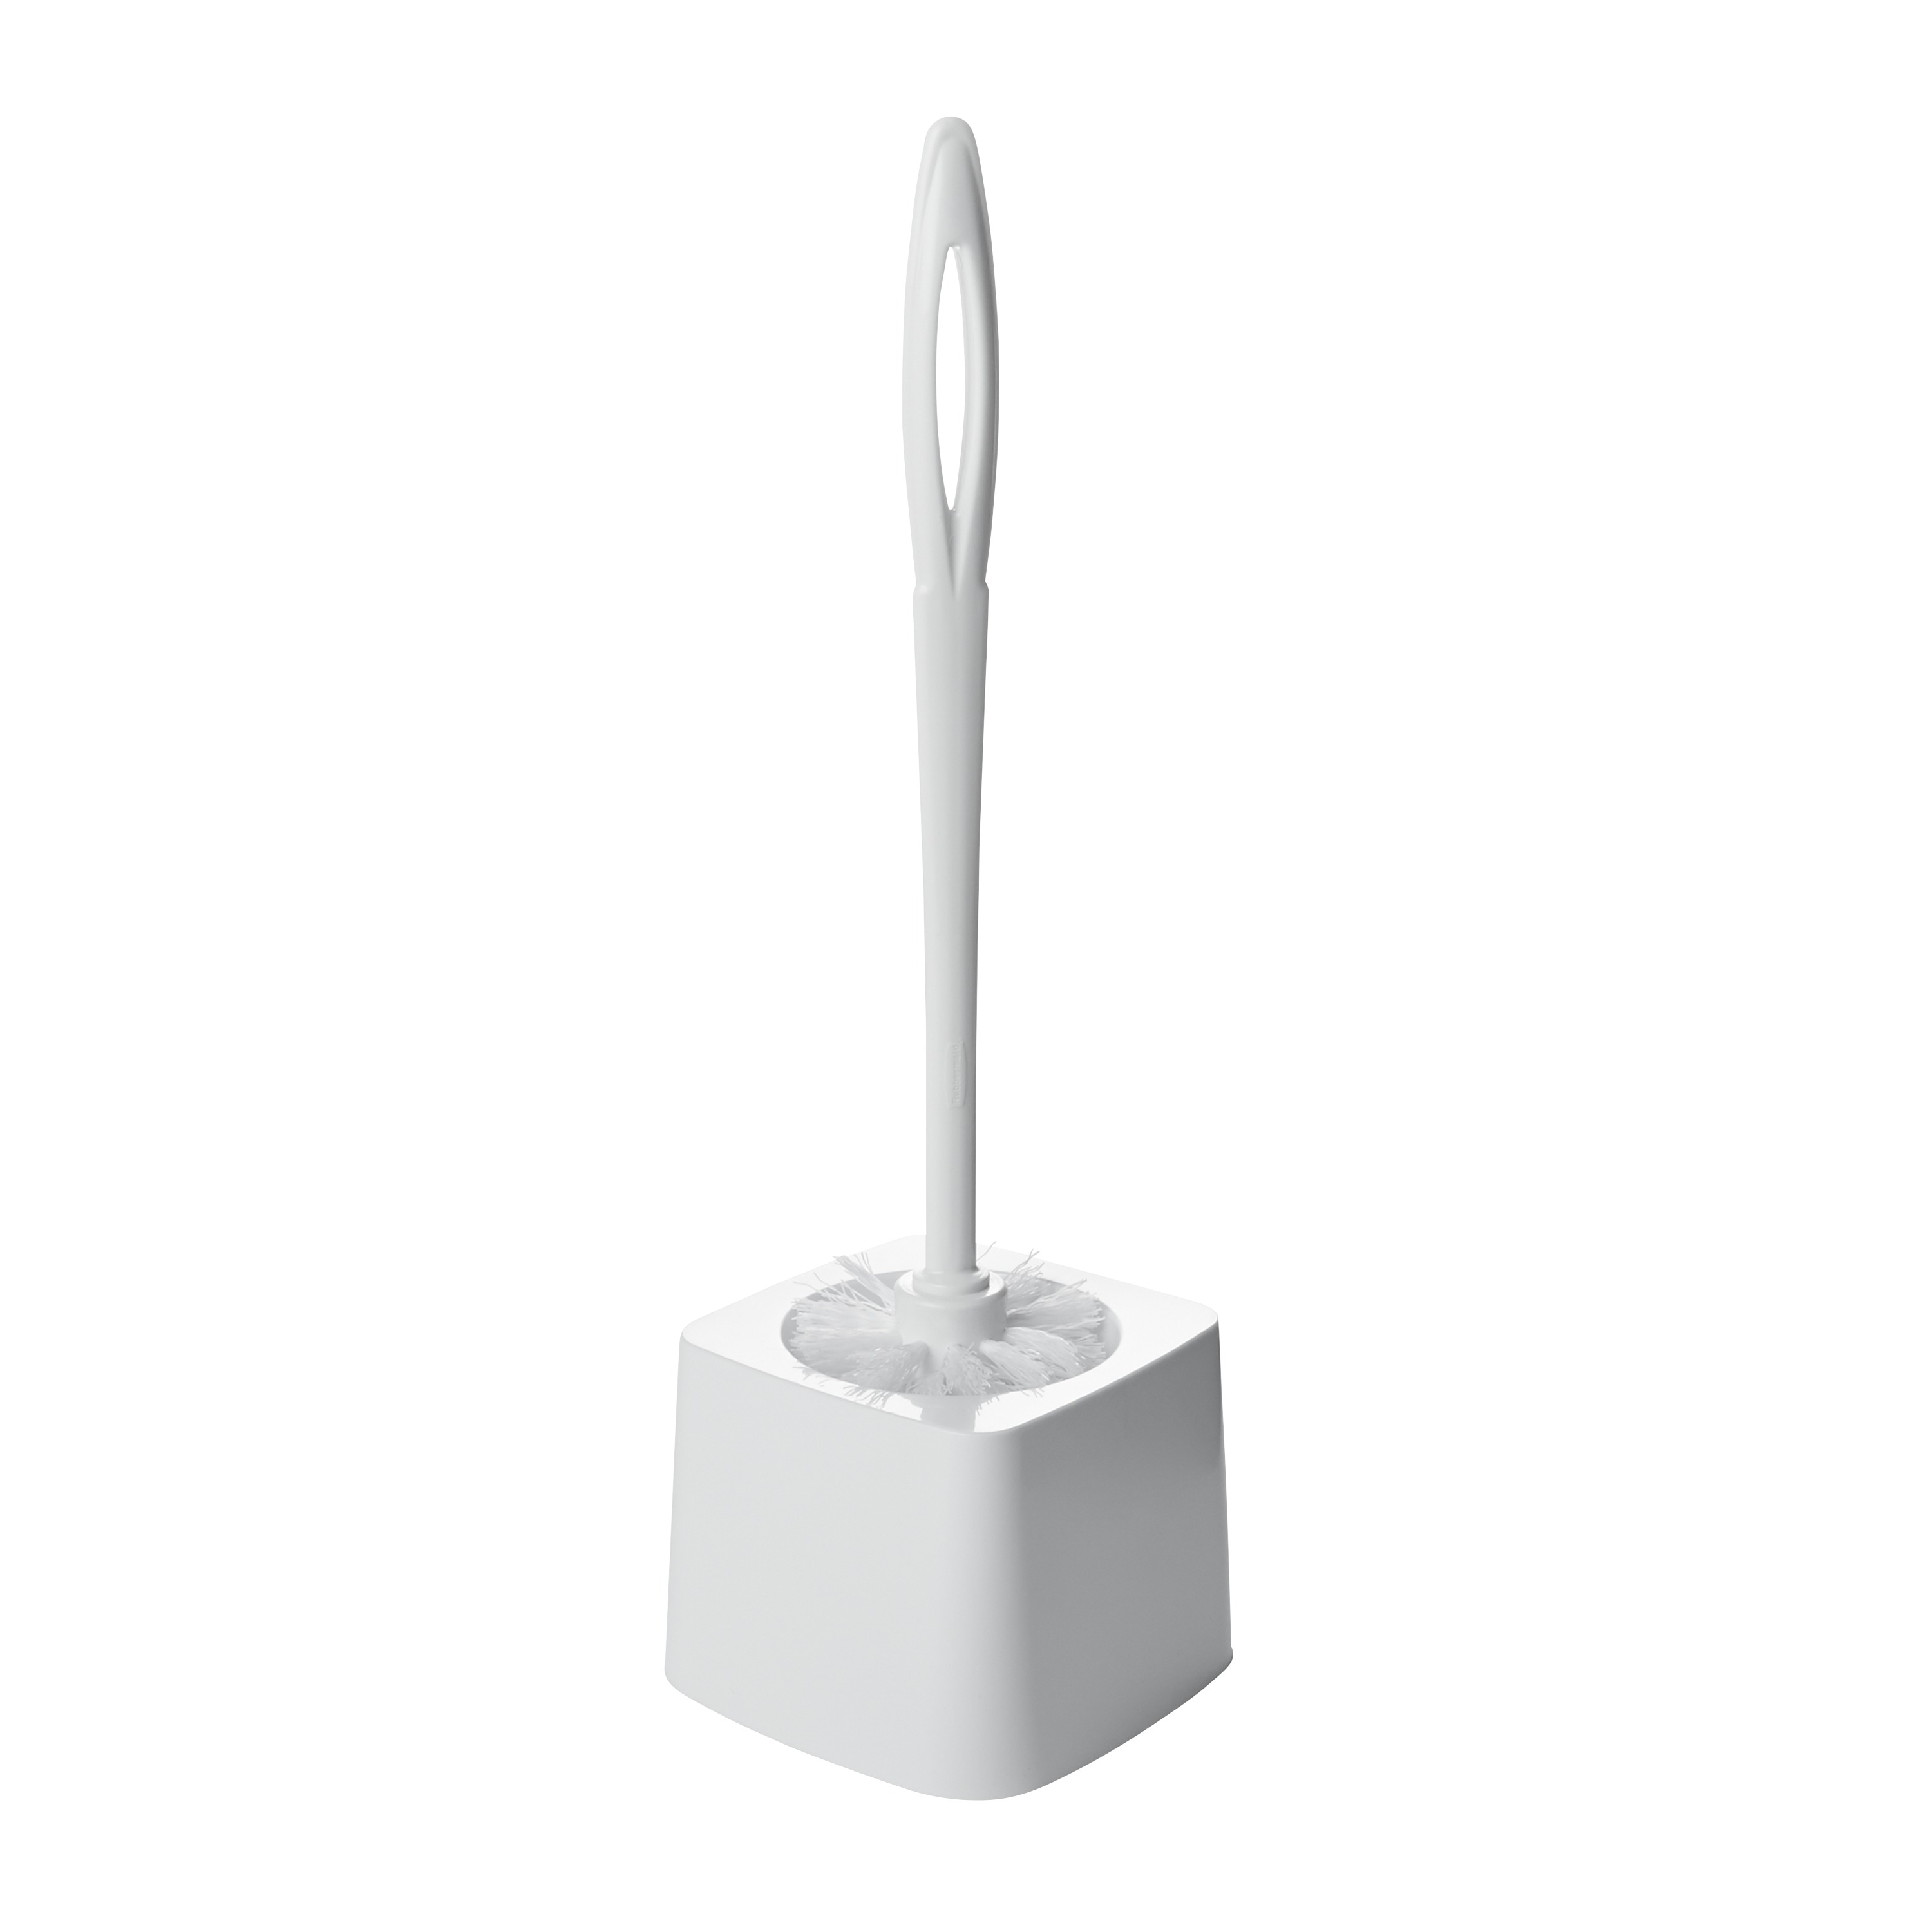 9. Rubbermaid FG6B990 Toilet Cleaning Brush  Clean toilet bowl, Toilet  cleaning, Toilet bowl brush